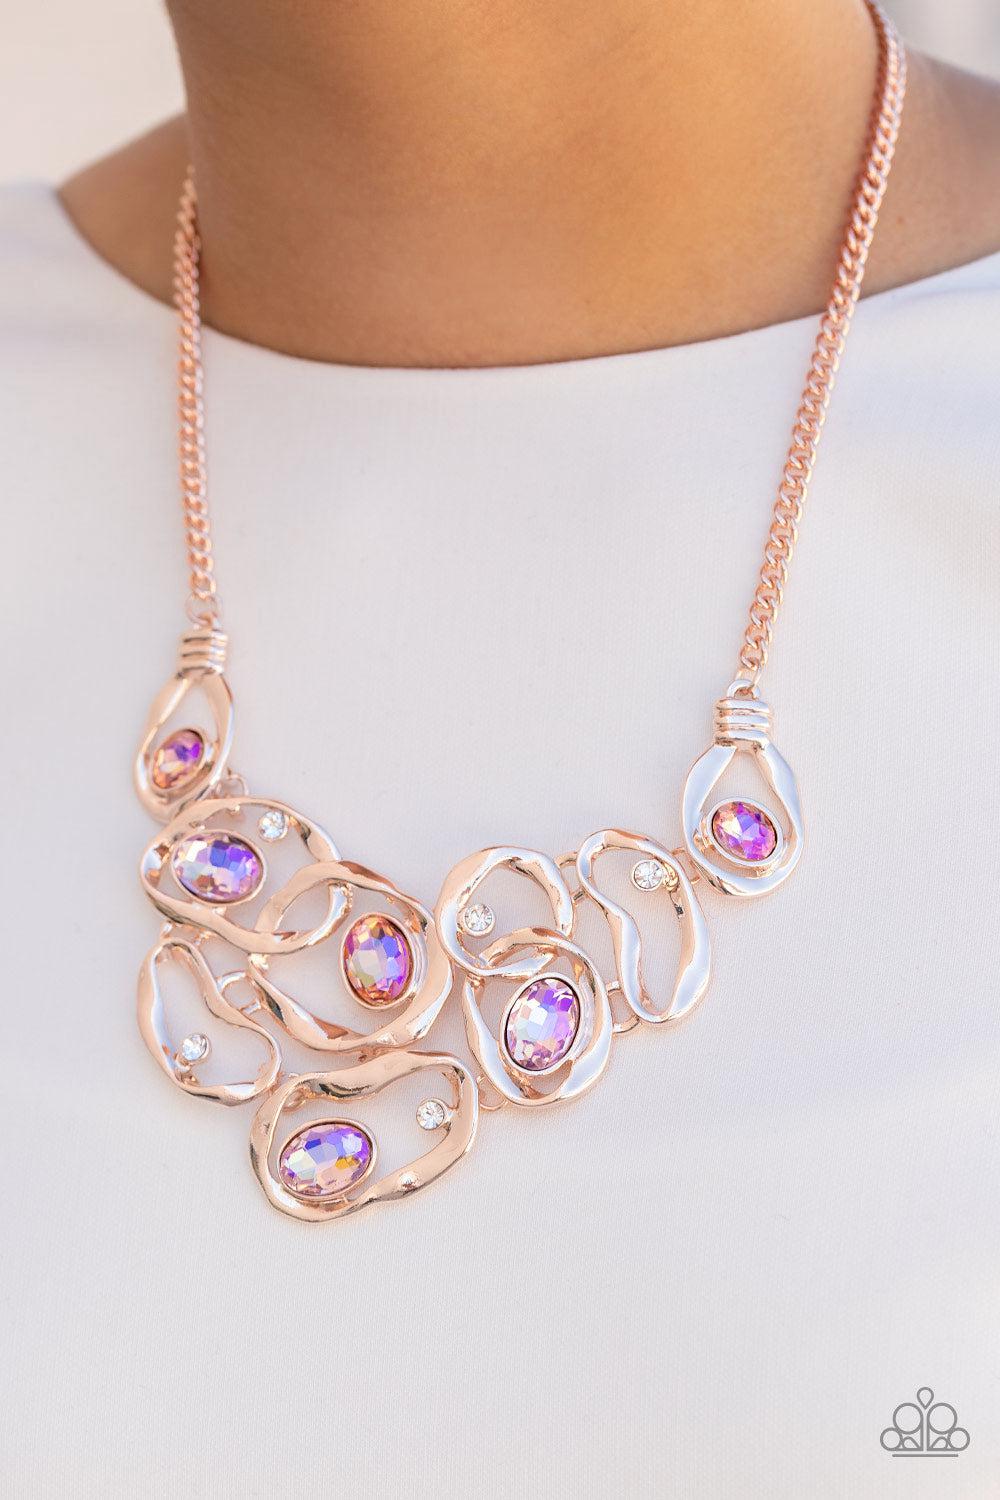 Warp Speed Rose Gold and Iridescent Rhinestone Necklace - Paparazzi Accessories-on model - CarasShop.com - $5 Jewelry by Cara Jewels